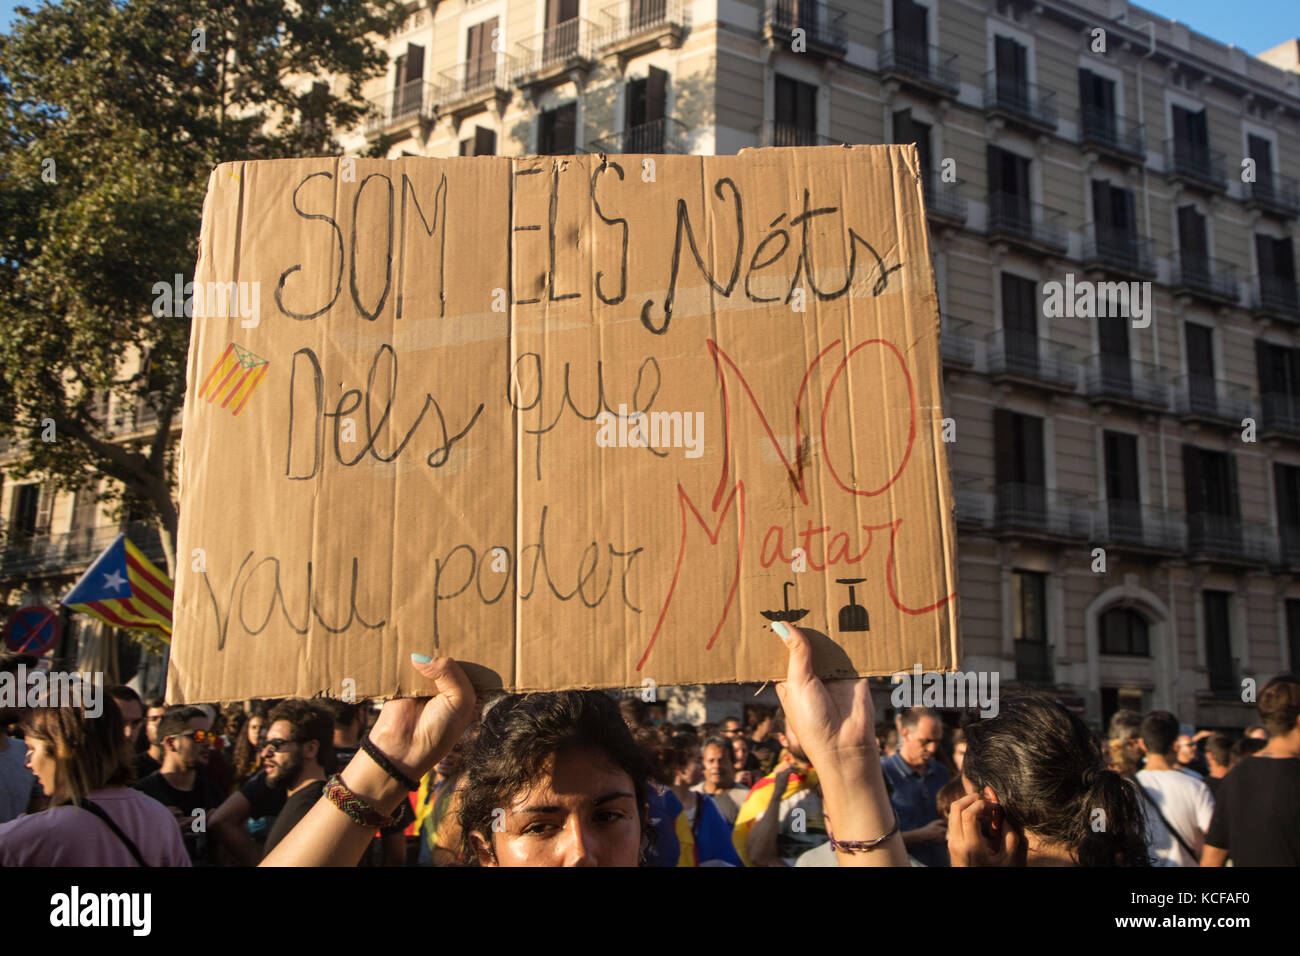 Barcelona, Spain - October 3, 2017. Demonstrators bearing placards during protests for independence in Barcelona, Catalonia, Spain. On that banner is said: 'We are the grandsons of grandparents you could not kill (referring spanish civil war in 1936-39' Stock Photo